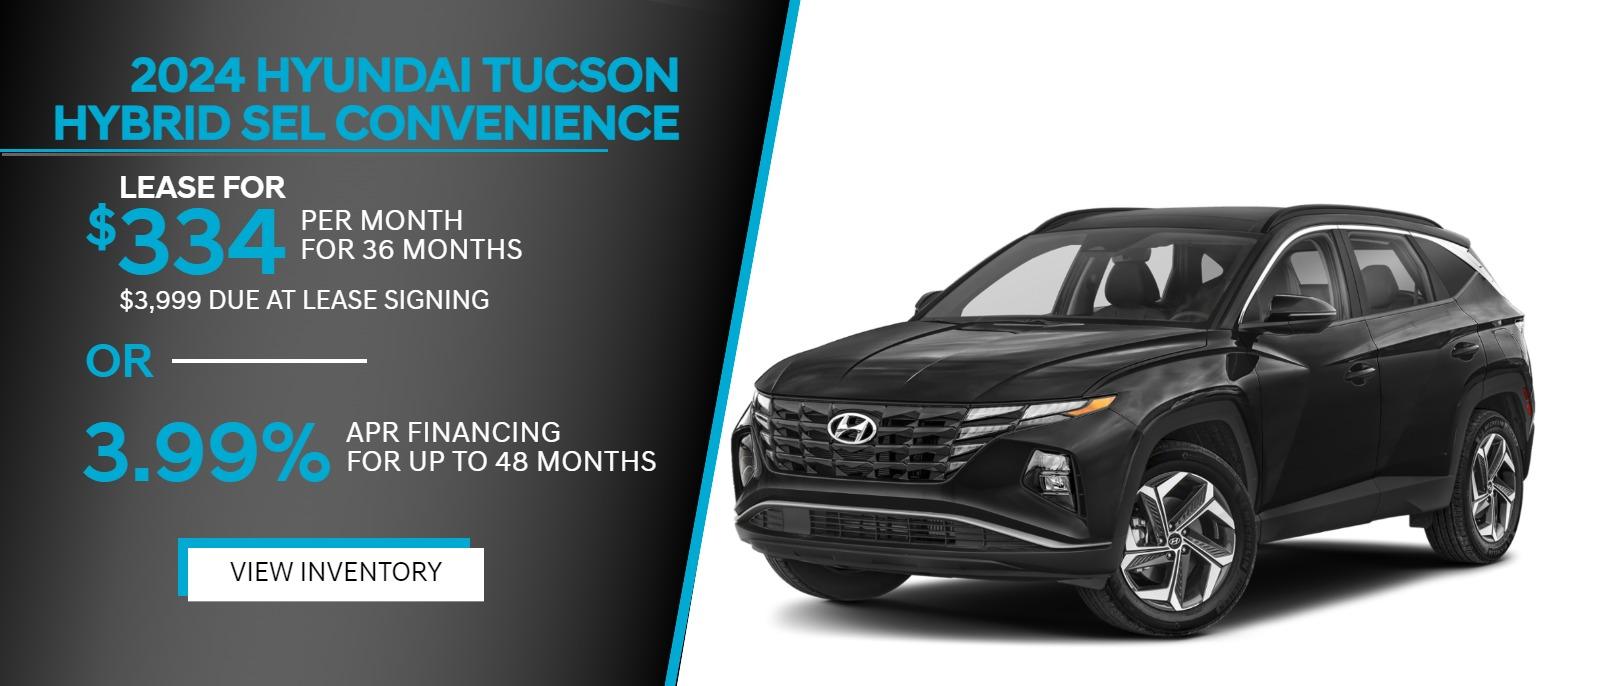 2024 TUCSON Hybrid SEL Convenience
$334/mo
For 36 months with $3,999 due at lease signing
3.99% APR
Financing for up to 48 months